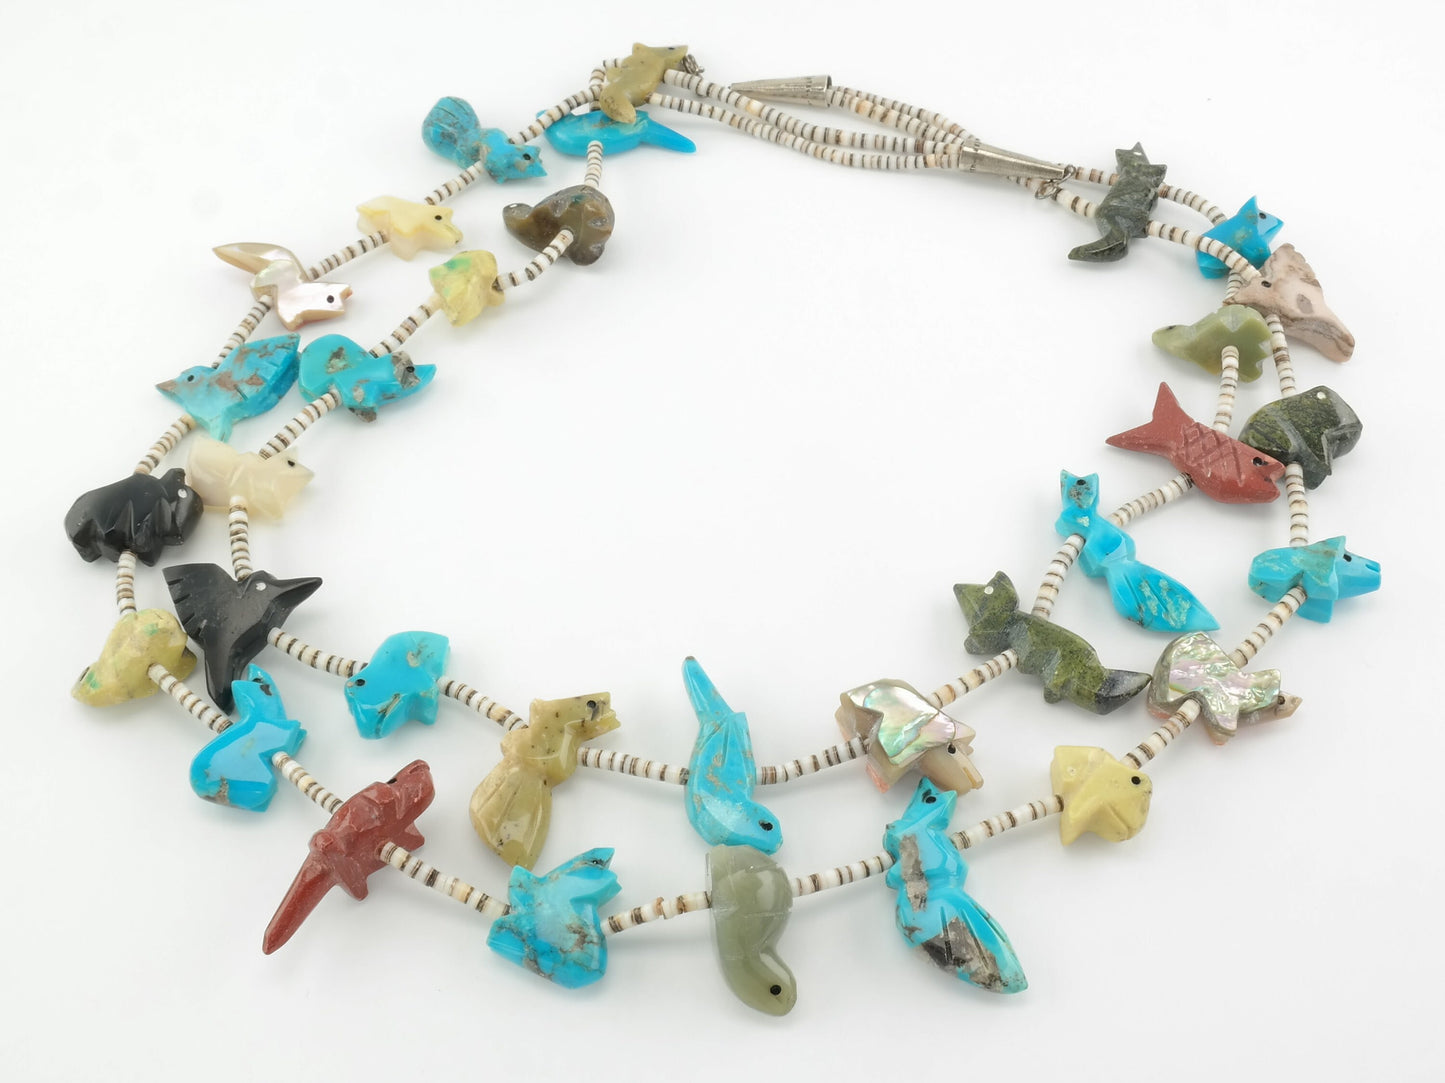 Vintage Zuni Turquoise, Multi Gem, Animal Carvings, Heishi, Bead, Sterling Silver Necklace